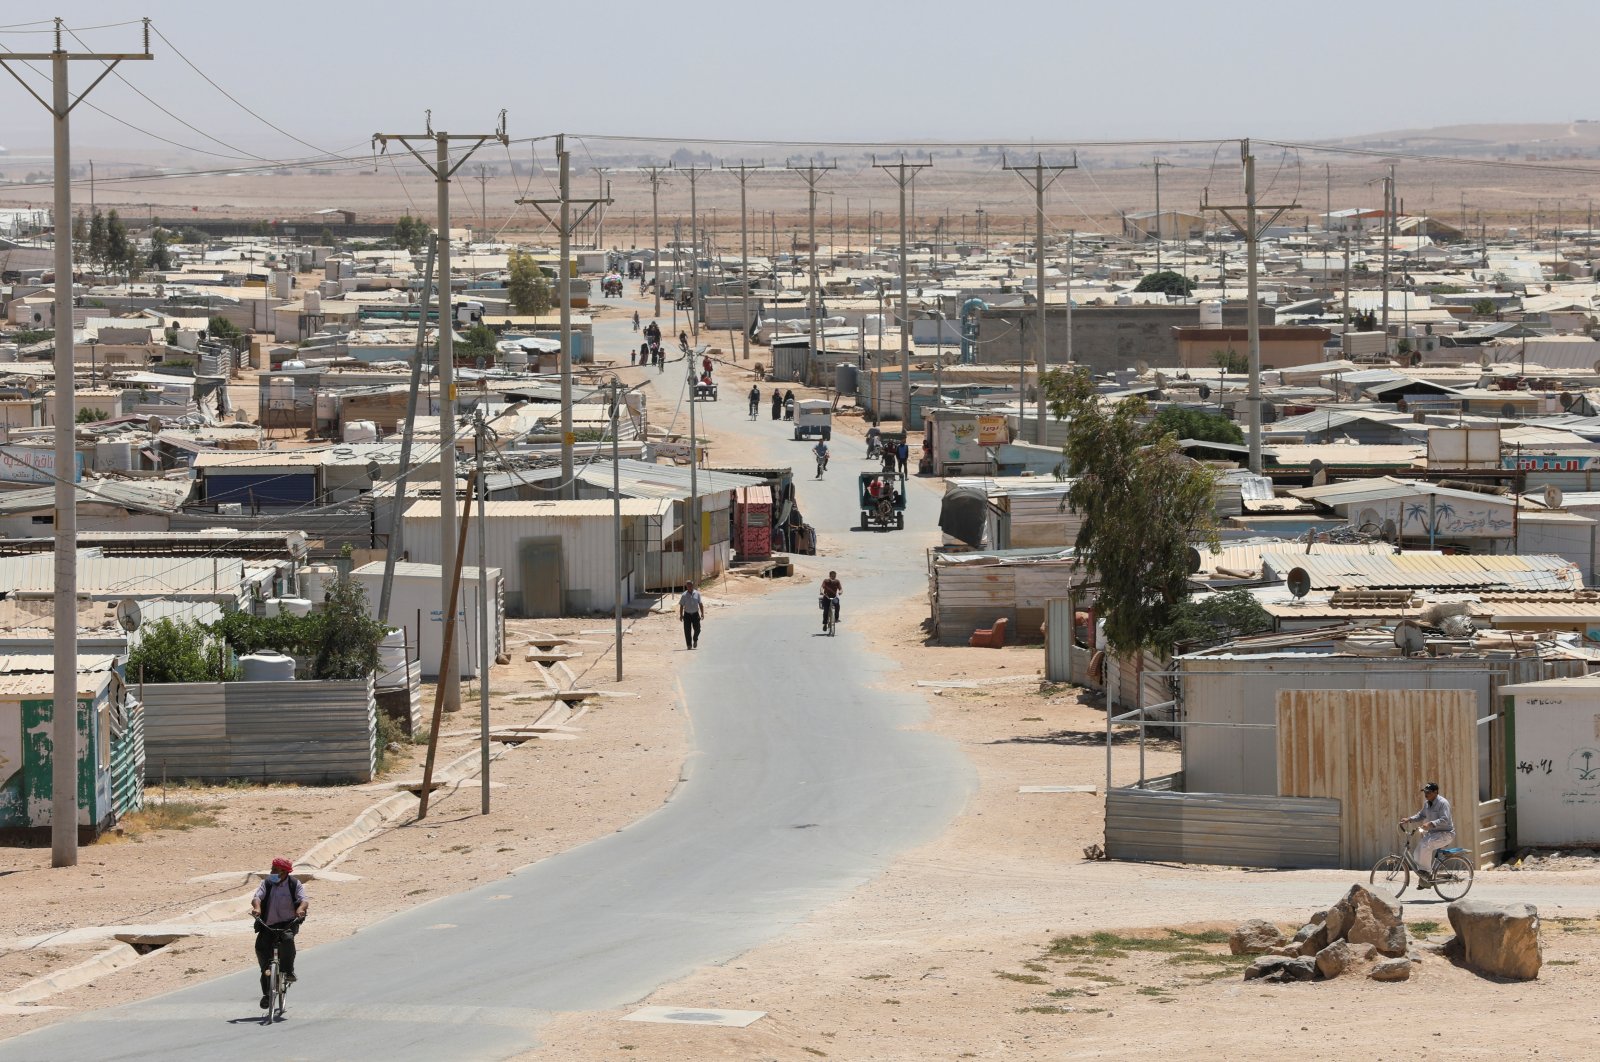 Syrian refugees are seen at the Zaatari refugee camp in the Jordanian city of Mafraq, near the border with Syria, Jordan June 17, 2021.(REUTERS Photo)  